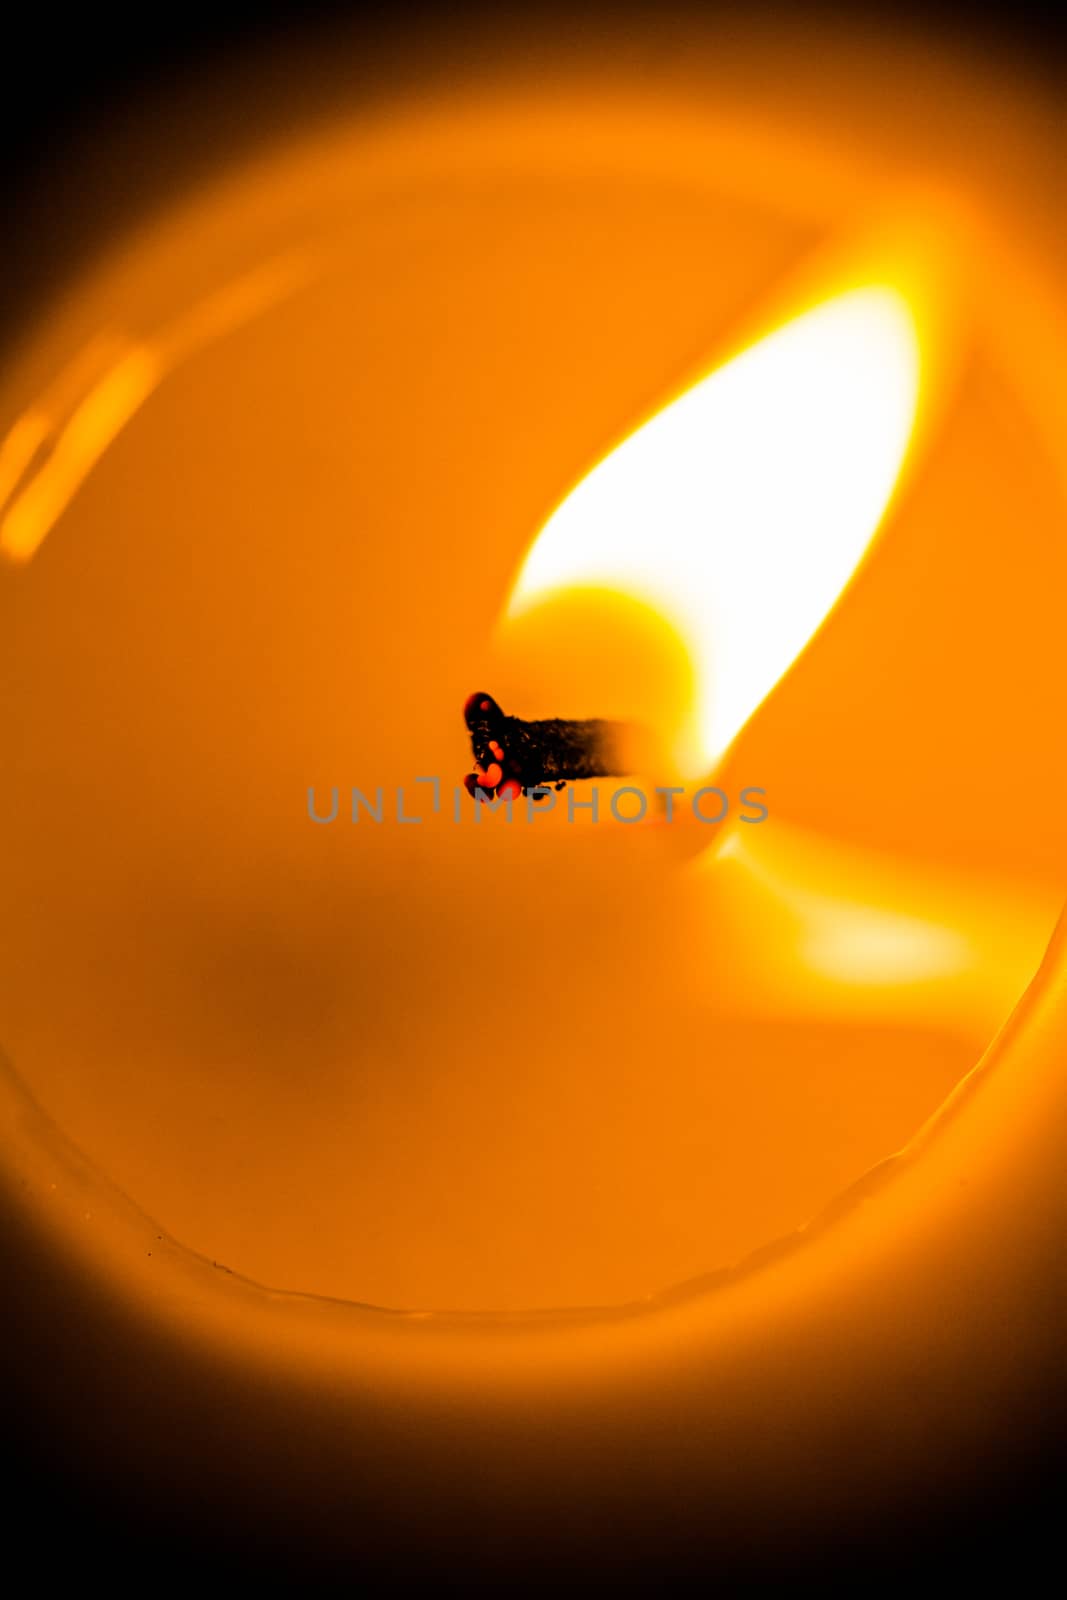 Closeup of a Candle Wick Burning by aetb